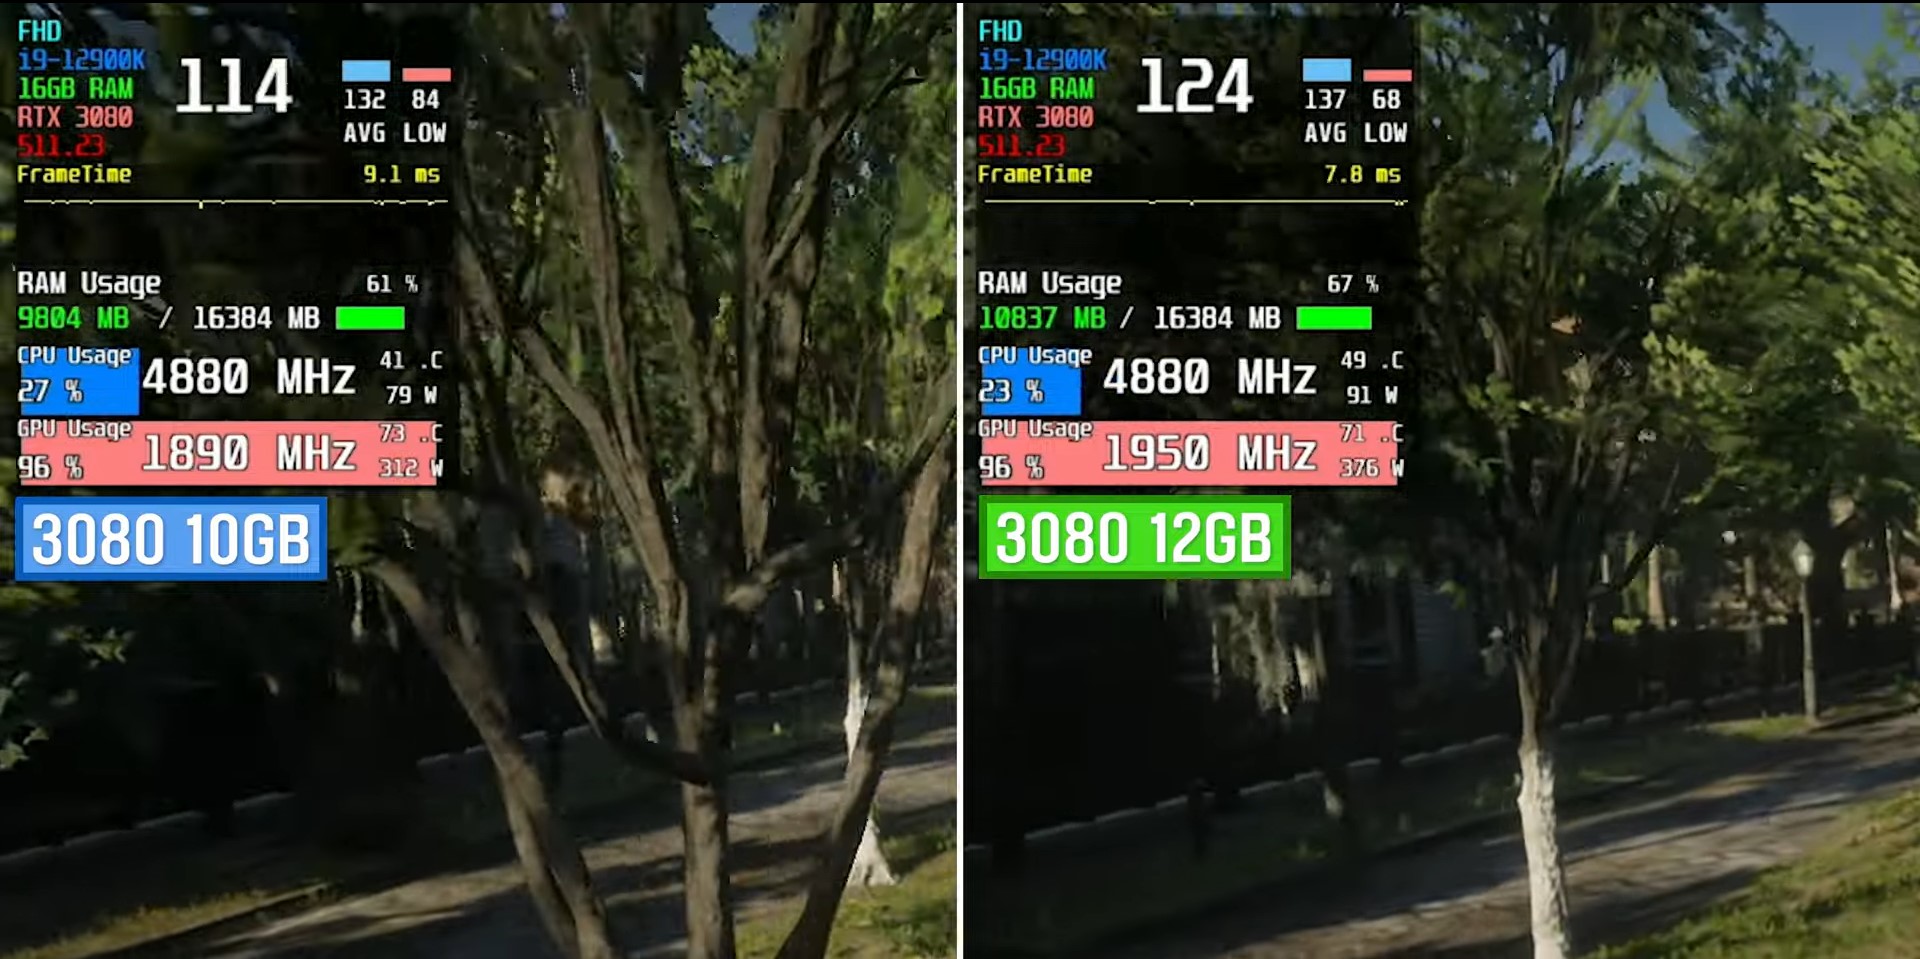 Benchmark Test of Red Dead Redemption 2 on RTX 3080 10 GB and RTX 3080 12 GB at 1080p